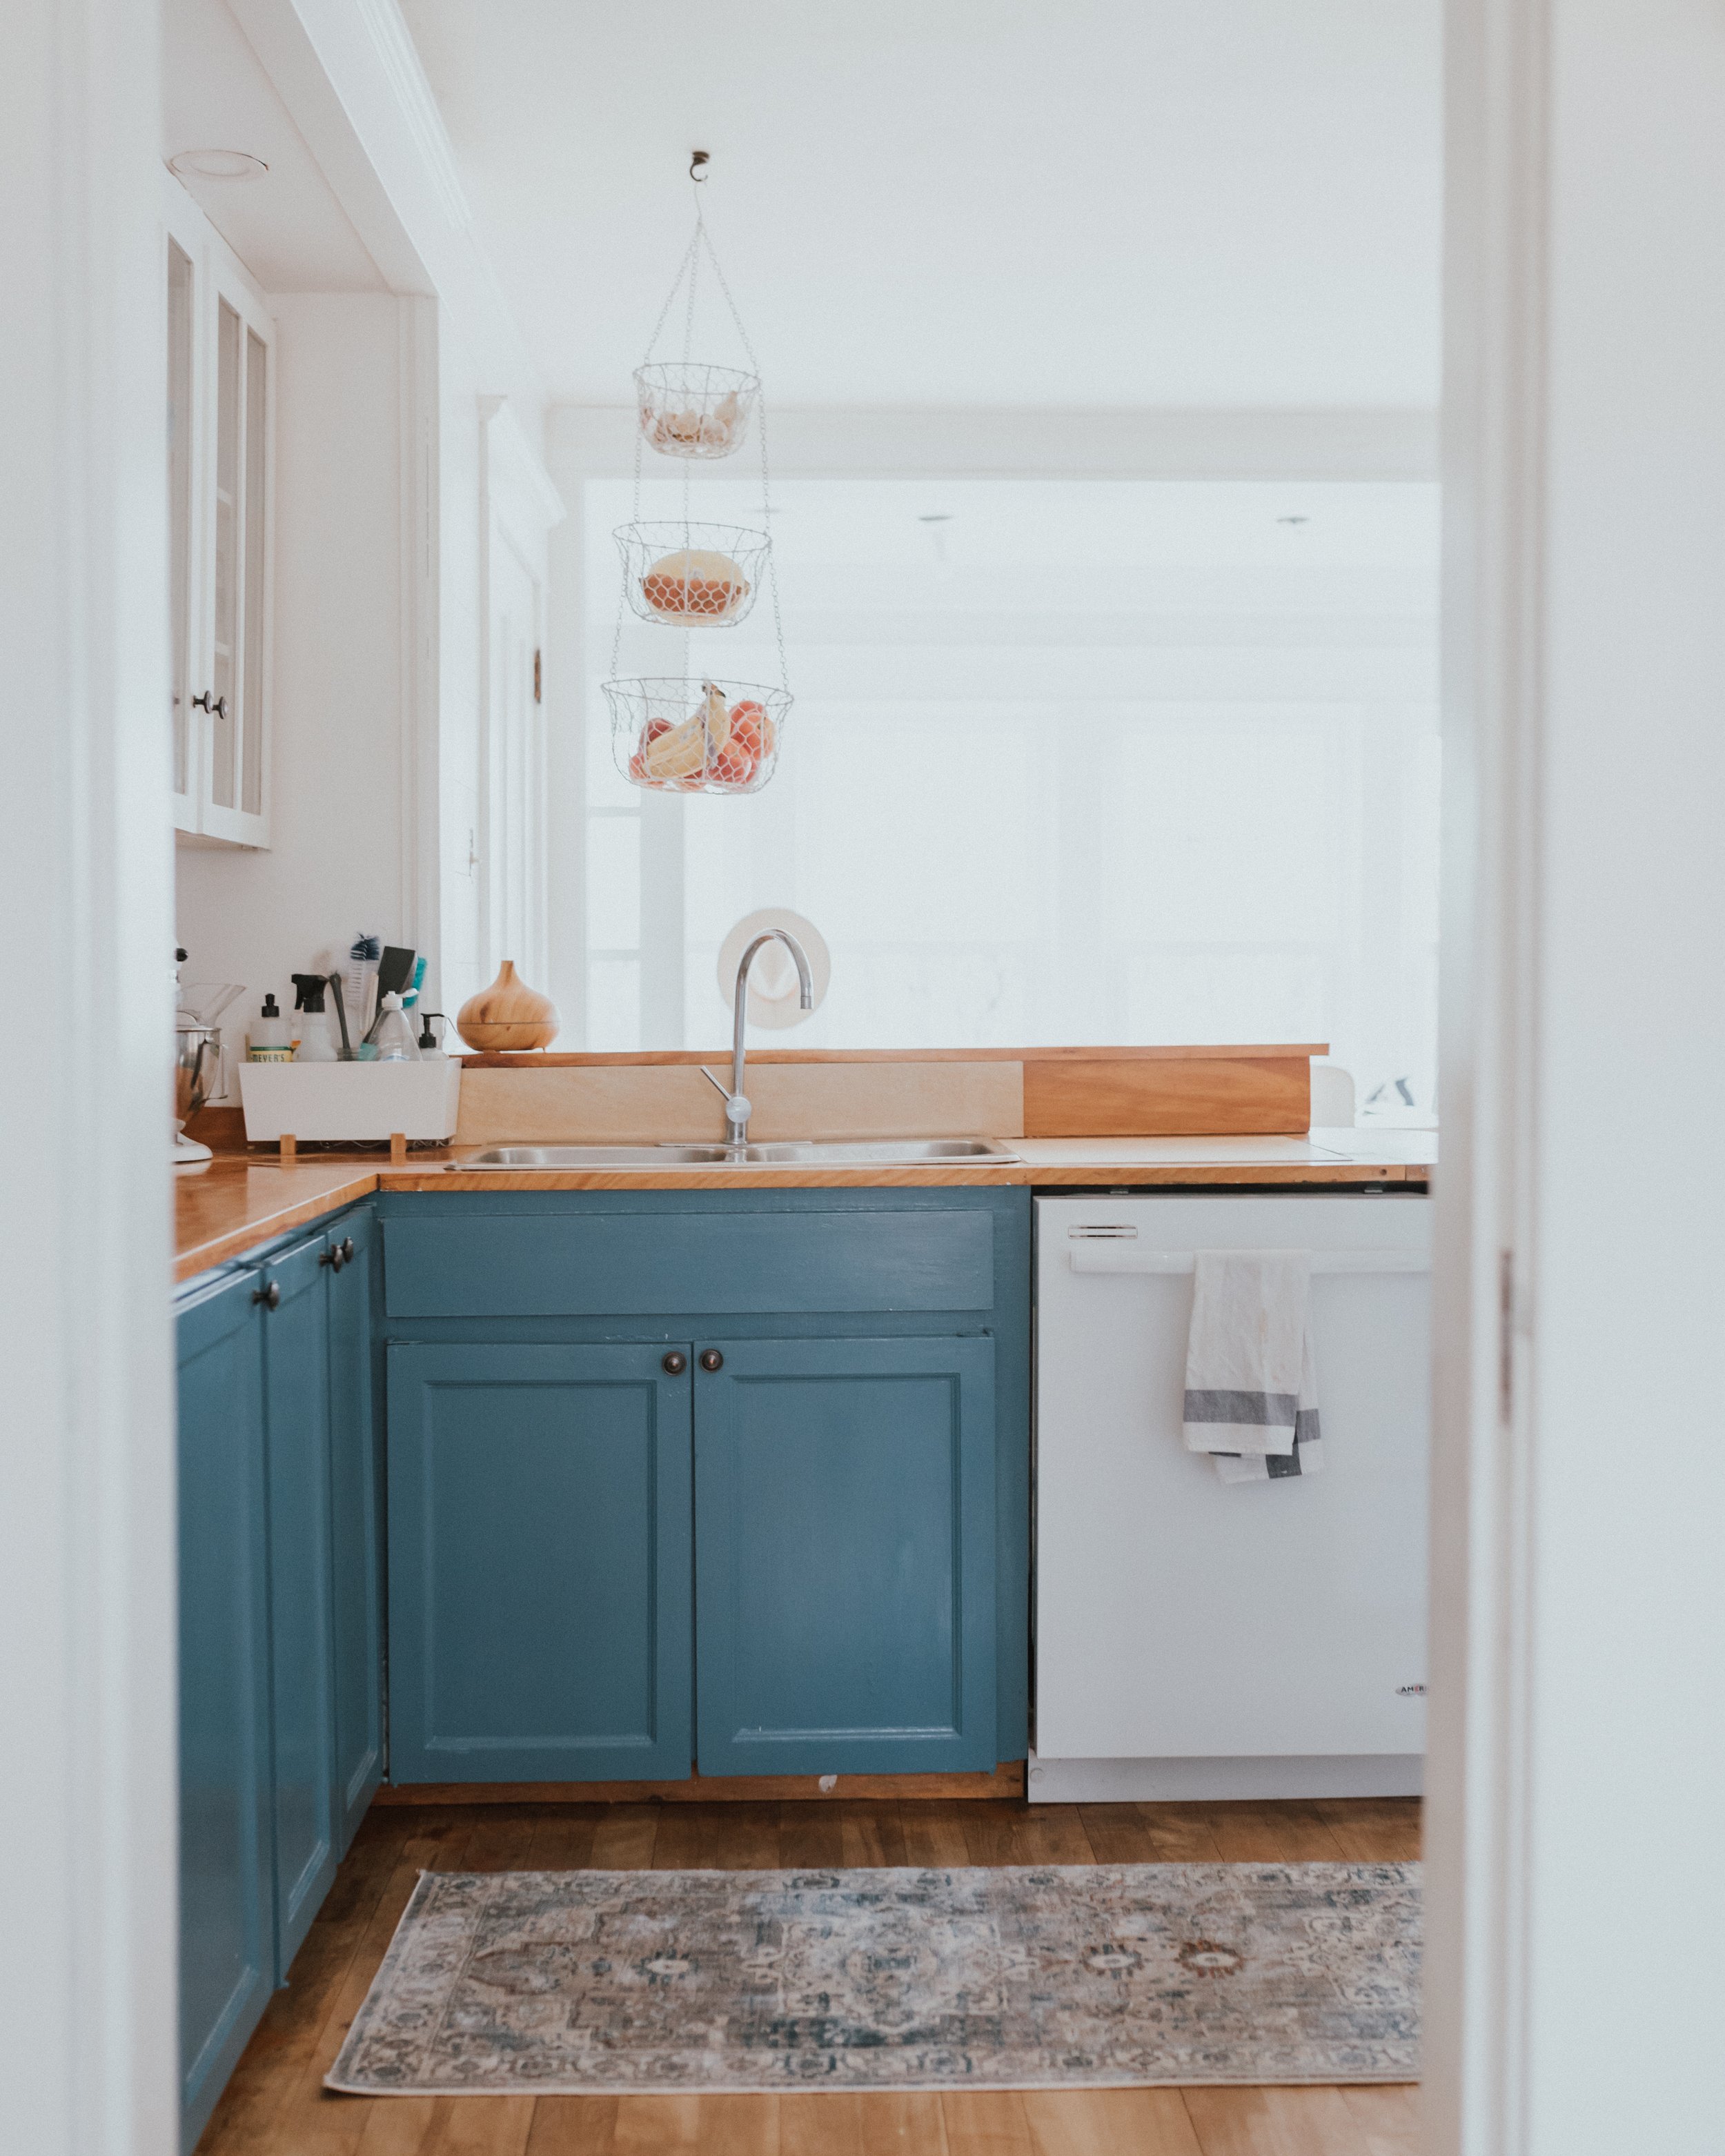 The Wild Decoelis | How We Transformed Our Kitchen For Under $1500 | after | blue kitchen cabinets in Behr Blueprint